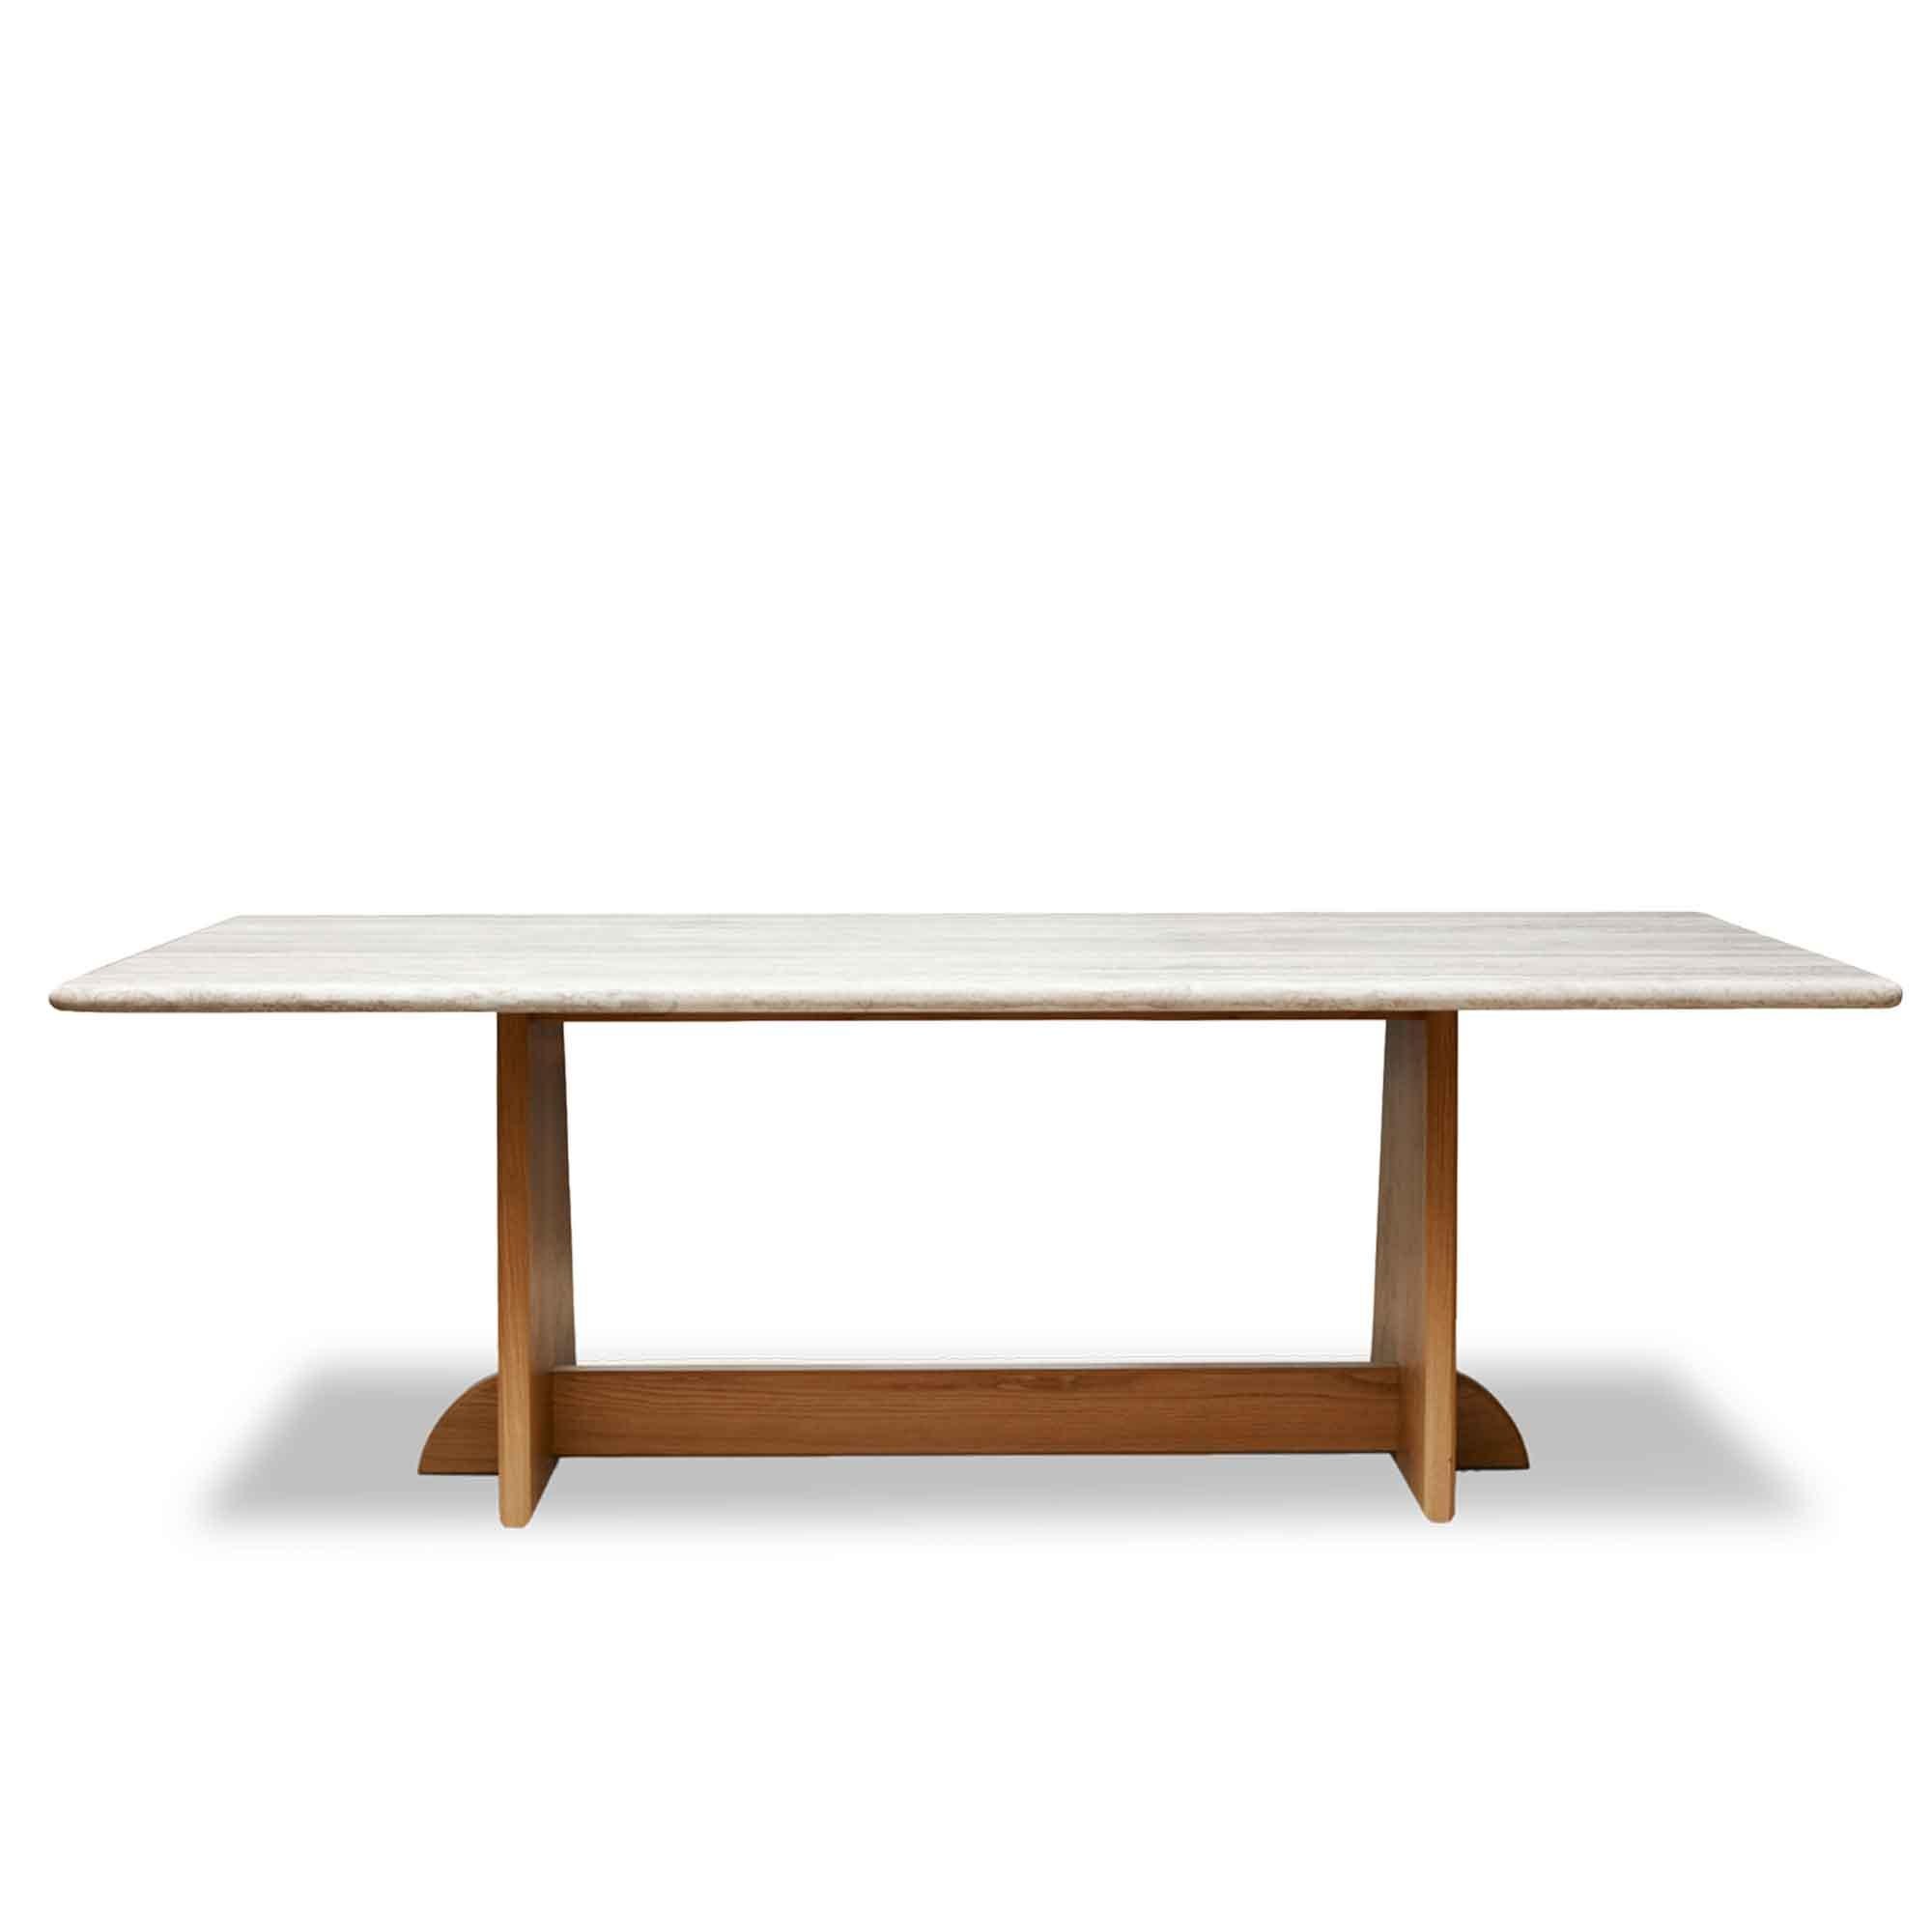 Mid-Century Modern Travertine Ojai Dining Table by Lawson-Fenning For Sale